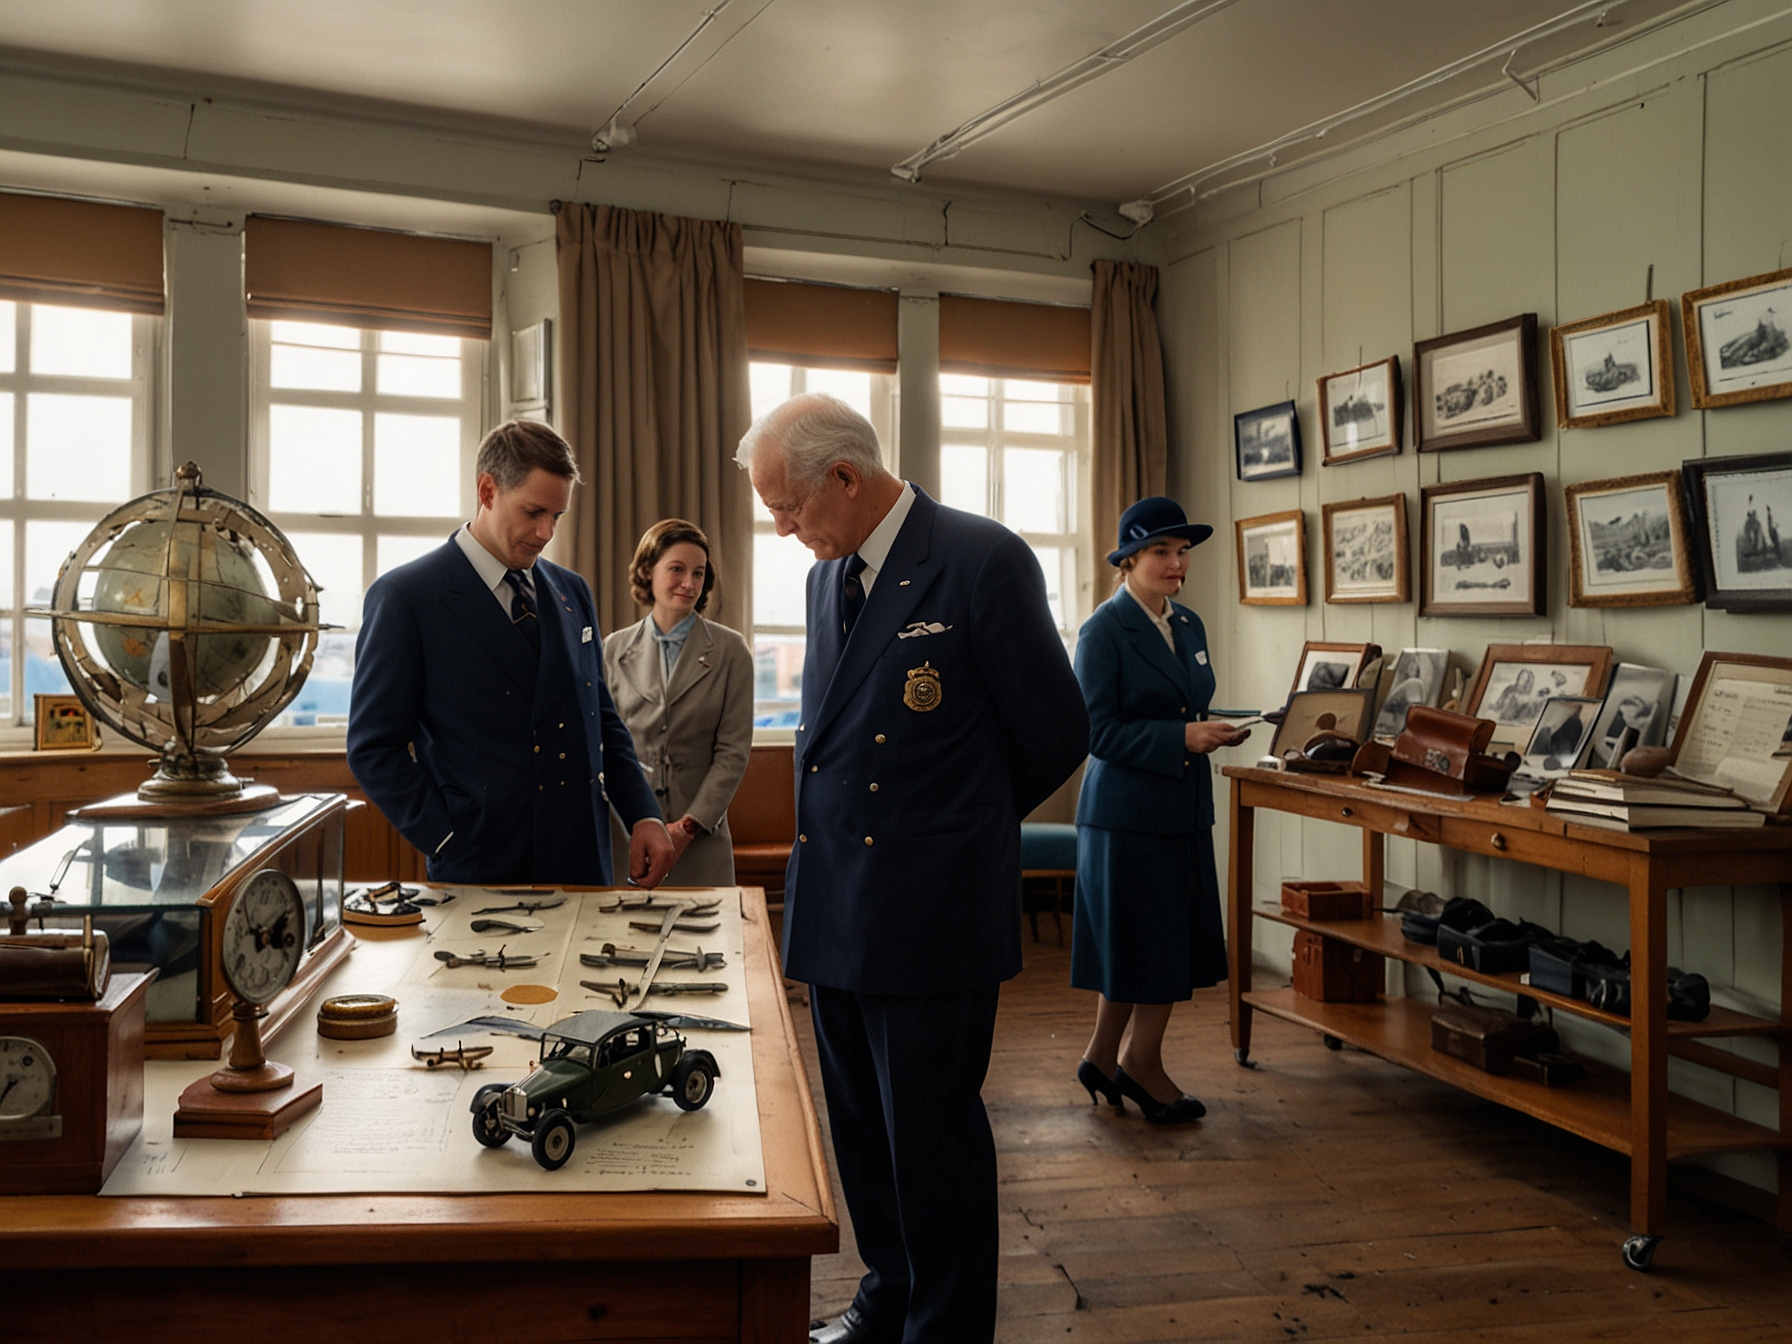 Visitors examining vintage aviation artifacts in Croydon Airport's small museum, featuring items like old pilot uniforms, airline tickets, and aircraft components, curated by aviation enthusiasts.